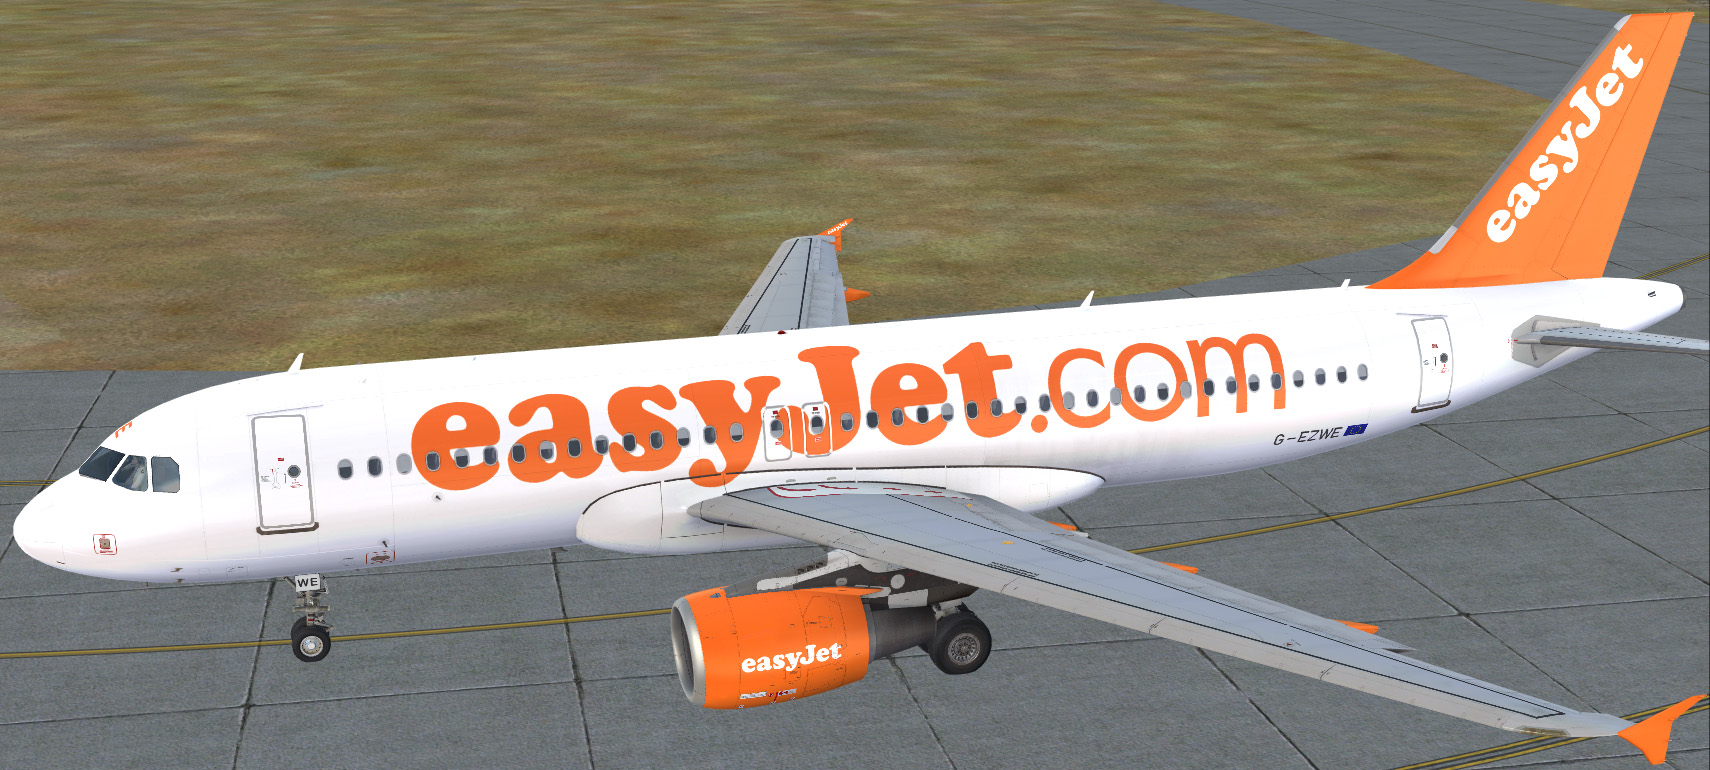 More information about "easyJet A320-214 G-EZWE"